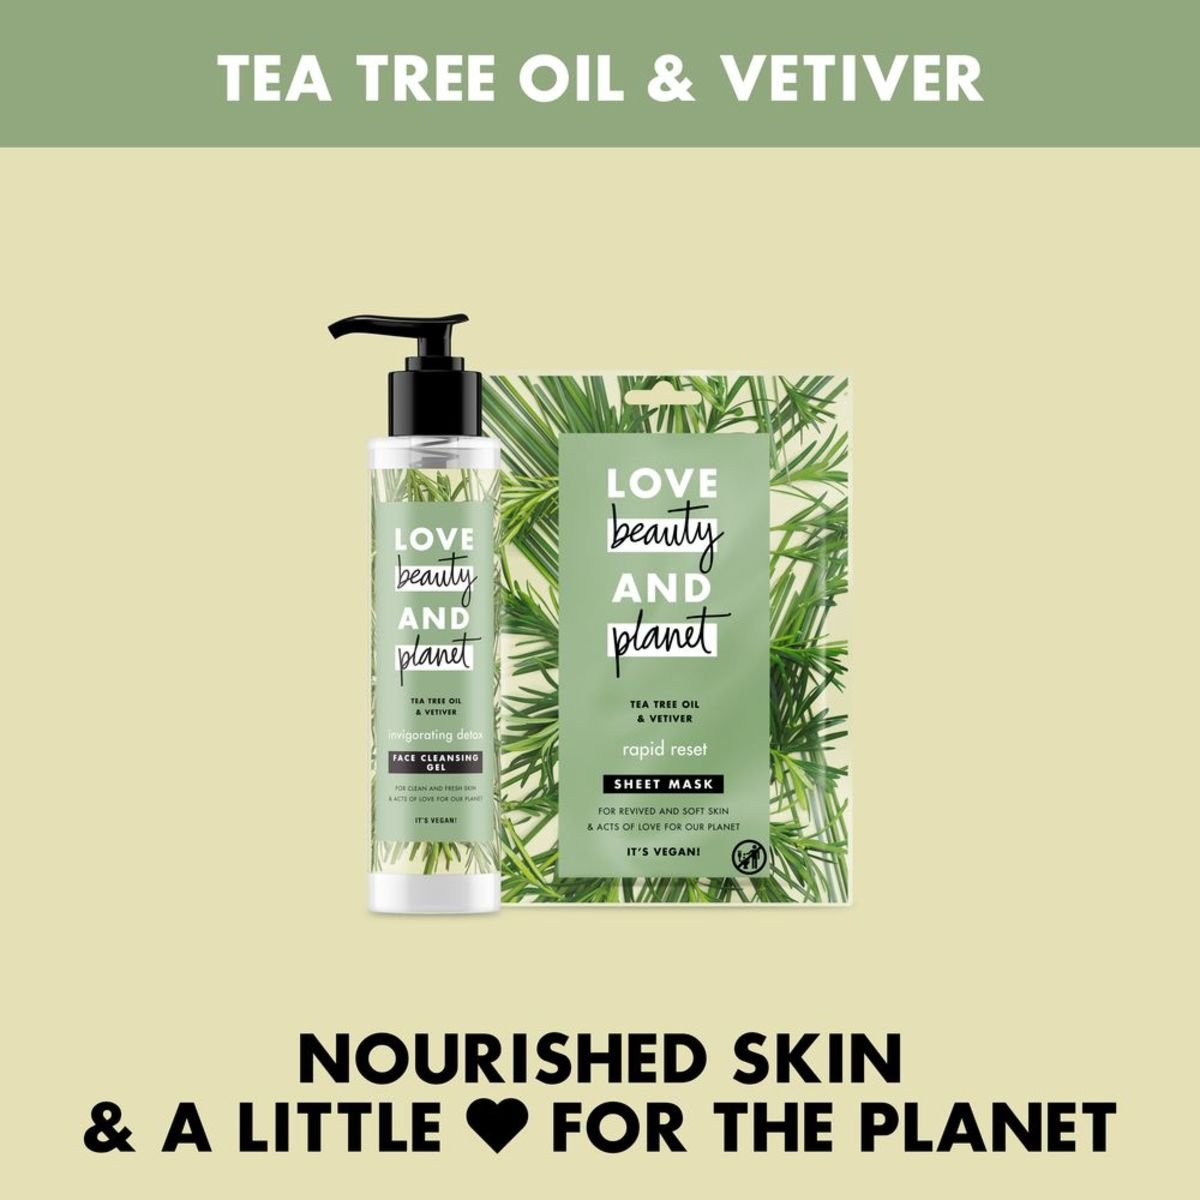 Love Beauty and Planet Sheet Mask Rapid Reset Tea Tree Oil & Vetiver 1 pc